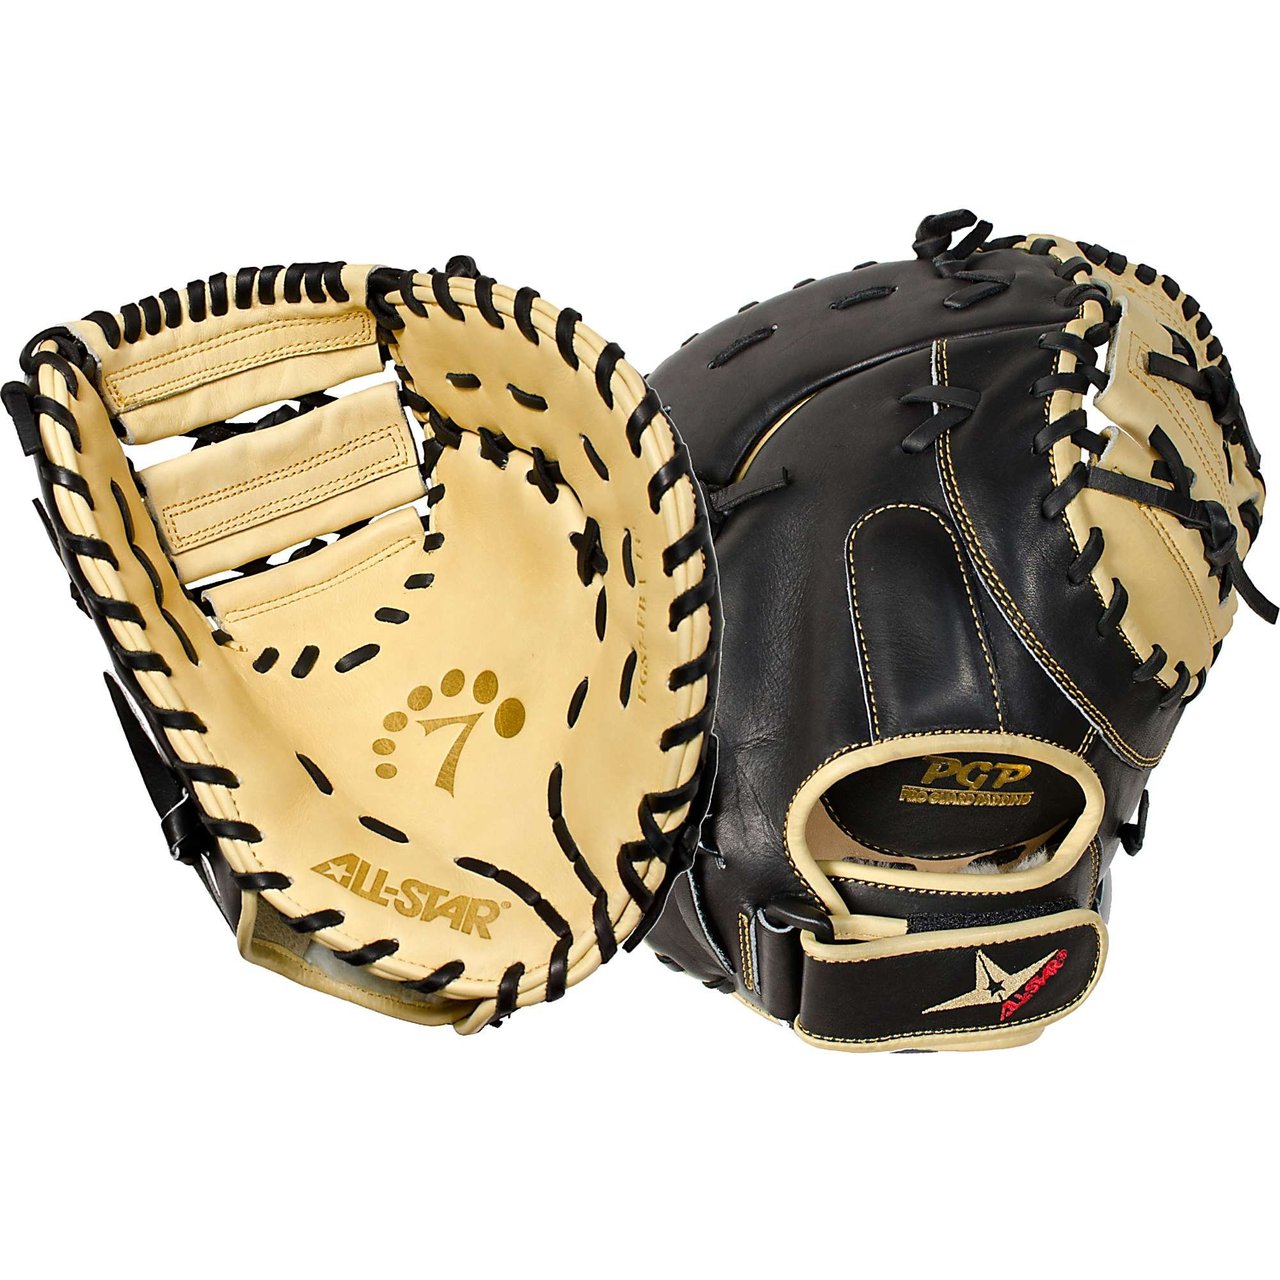 All Star System Seven FGS7-FB 13 Baseball First Base Mitt (Right Hand Throw) : Designed with the same high quality leather which made the CM3000 series catching mitts so popular, these System Seven fielding gloves have a similar personality: Fast break in and long lasting. High quality selection of Japanese Maruhashi black and tan leather. By design, All Star's tan leather breaks in fast and forms a great pocket. All Star lines the back of our gloves with black leather because it is more durable and stiffer, providing support for a long lasting glove. Pro Guard Padding provides a thin layer of extra padding in the palm area of the glove which helps kill the sting of a mis-caught ball. Pro Guard Padding is thin enough to still have enough feeling, so that you know exactly where the ball is located. System Seven fielding gloves are designed for specific position's needs. These gloves feel like an extension of your arm, empowering you with a long enough reach, maximum control, and complete confidence.